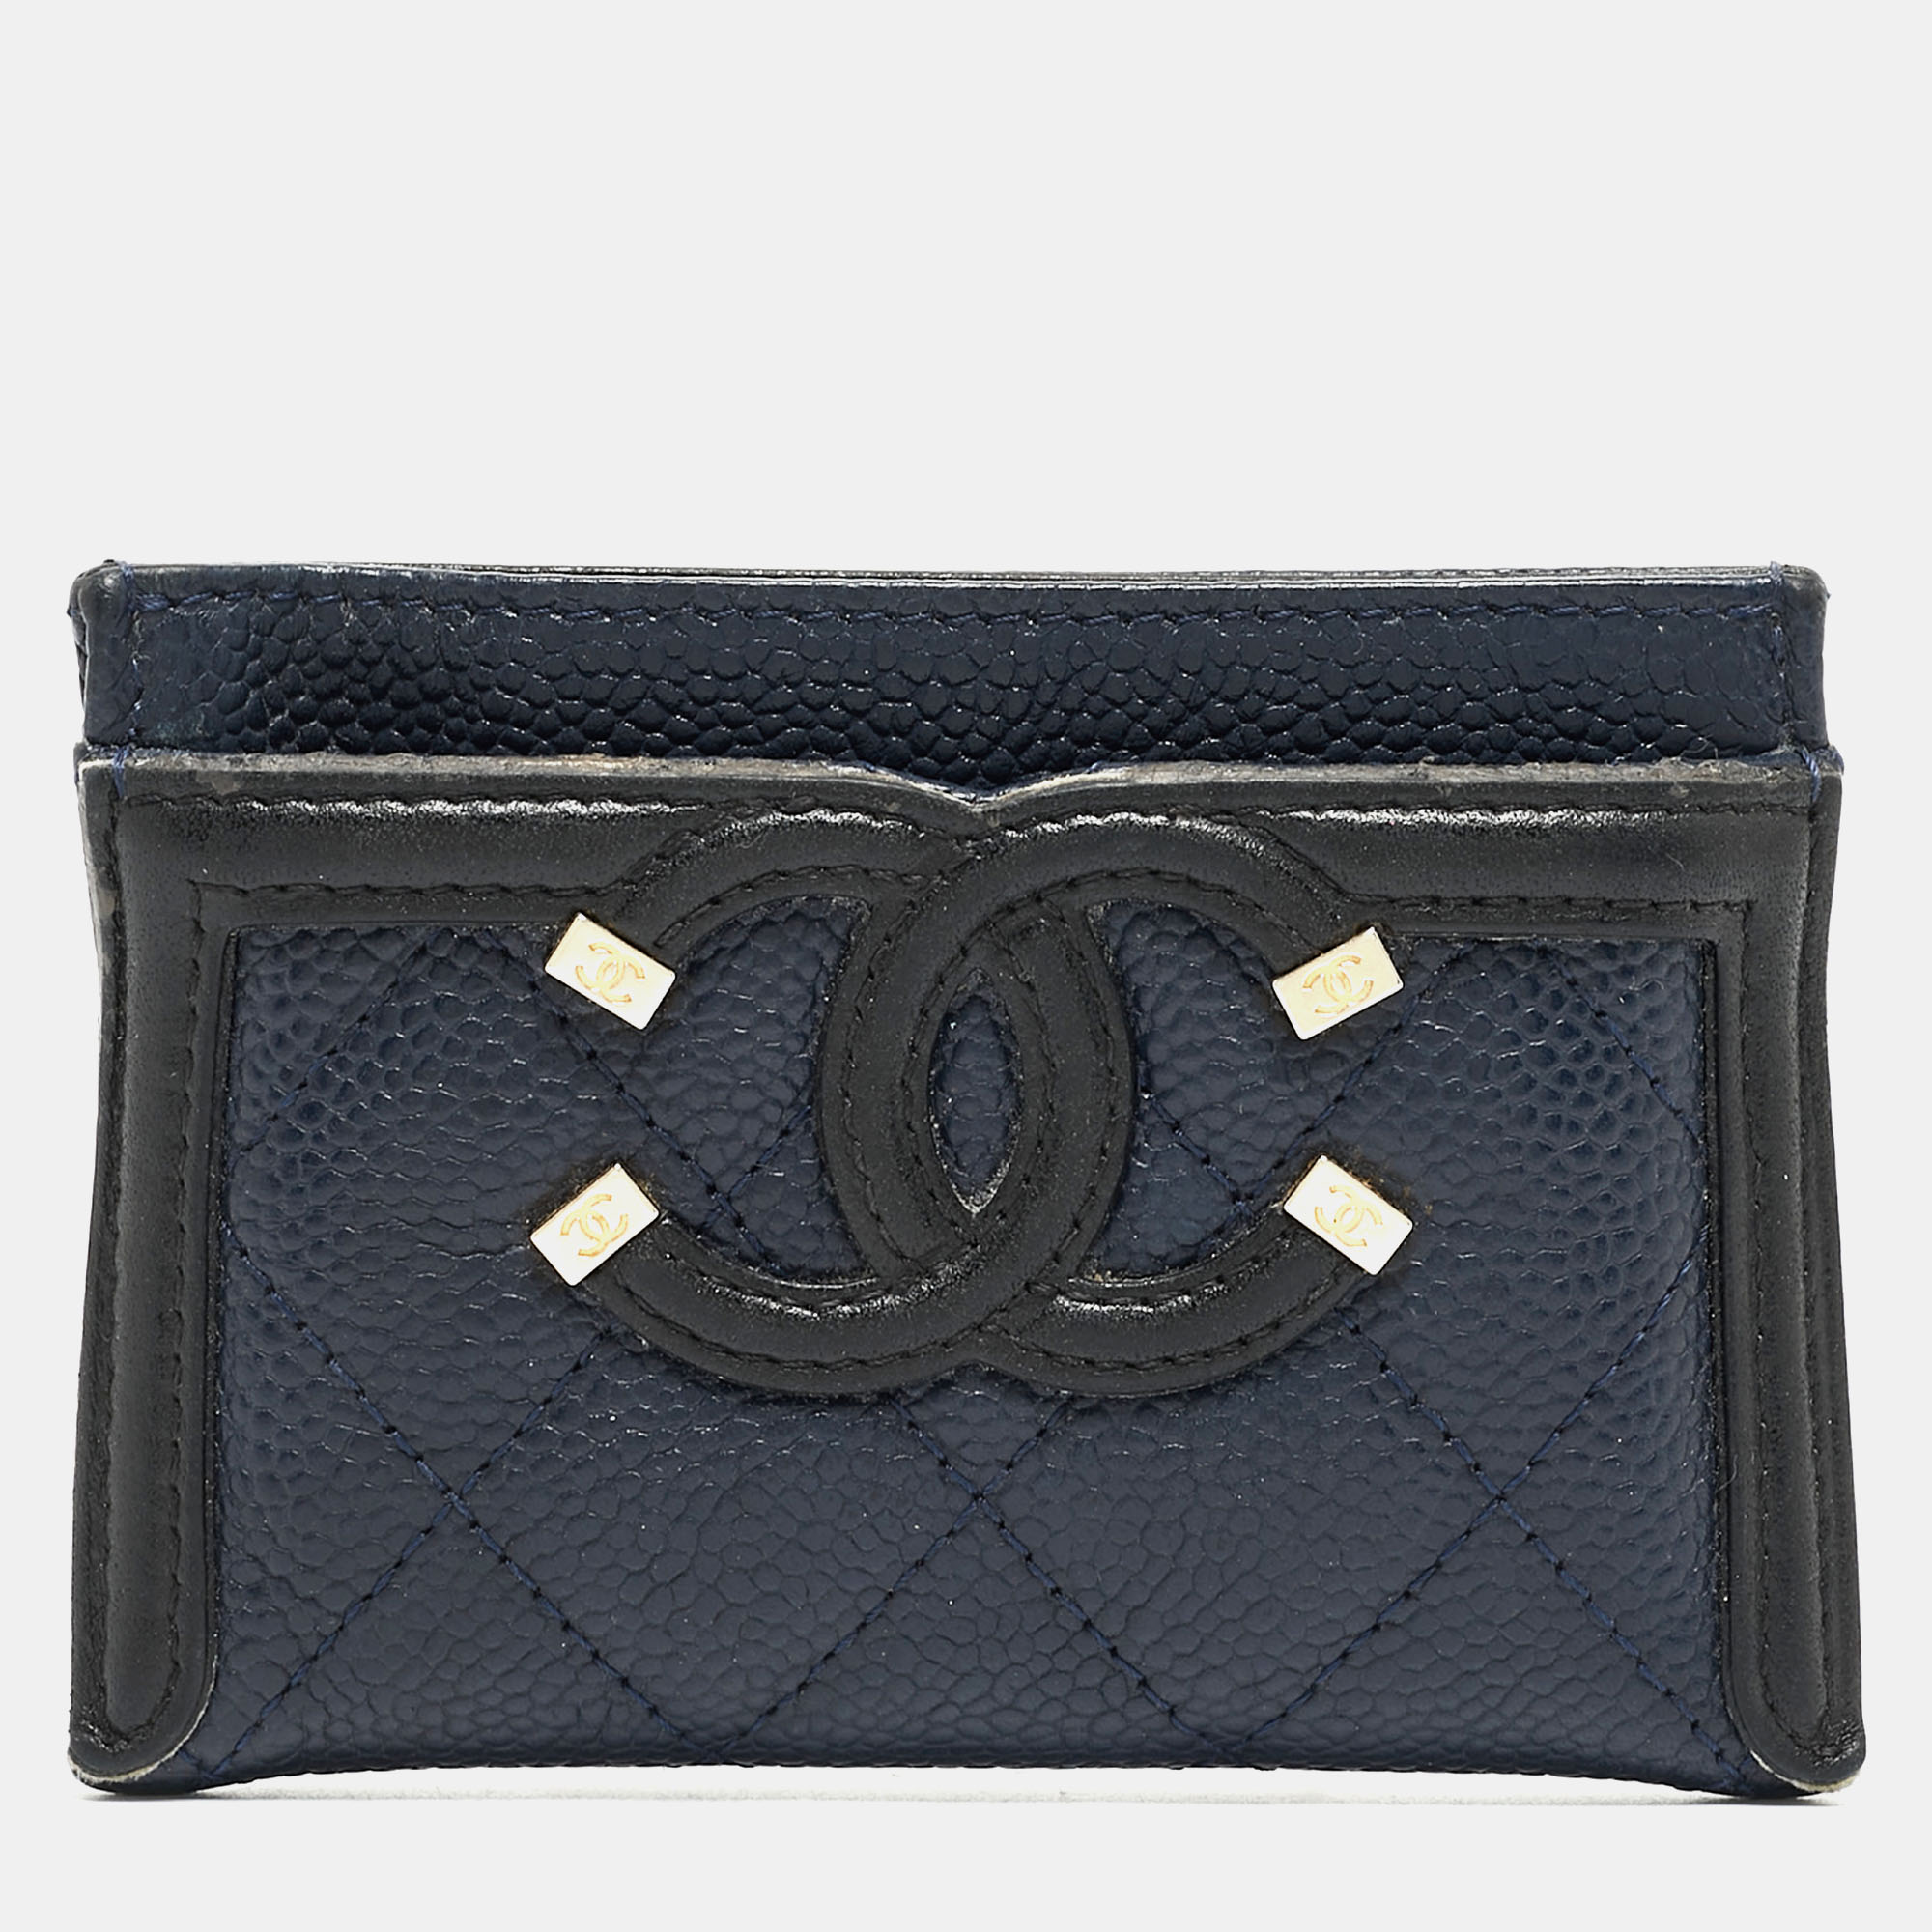 Chanel Blue/Black Quilted Caviar Leather Filigree Card Holder